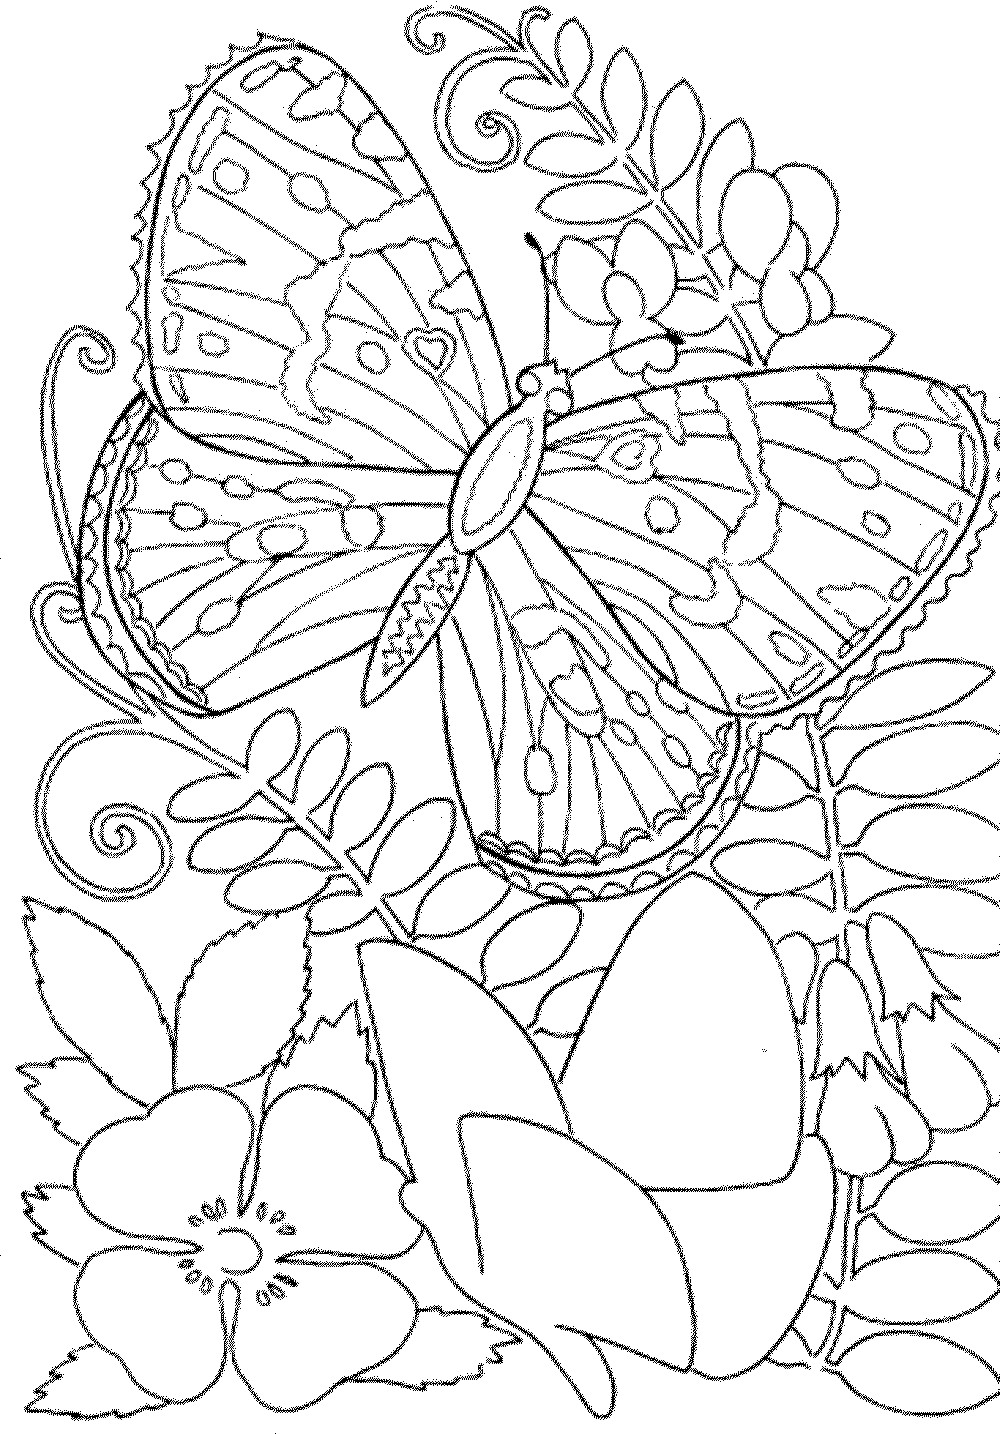 Free Coloring Pages For Adults Printable
 Free Owl Adult Coloring Pages To Print Coloring Home